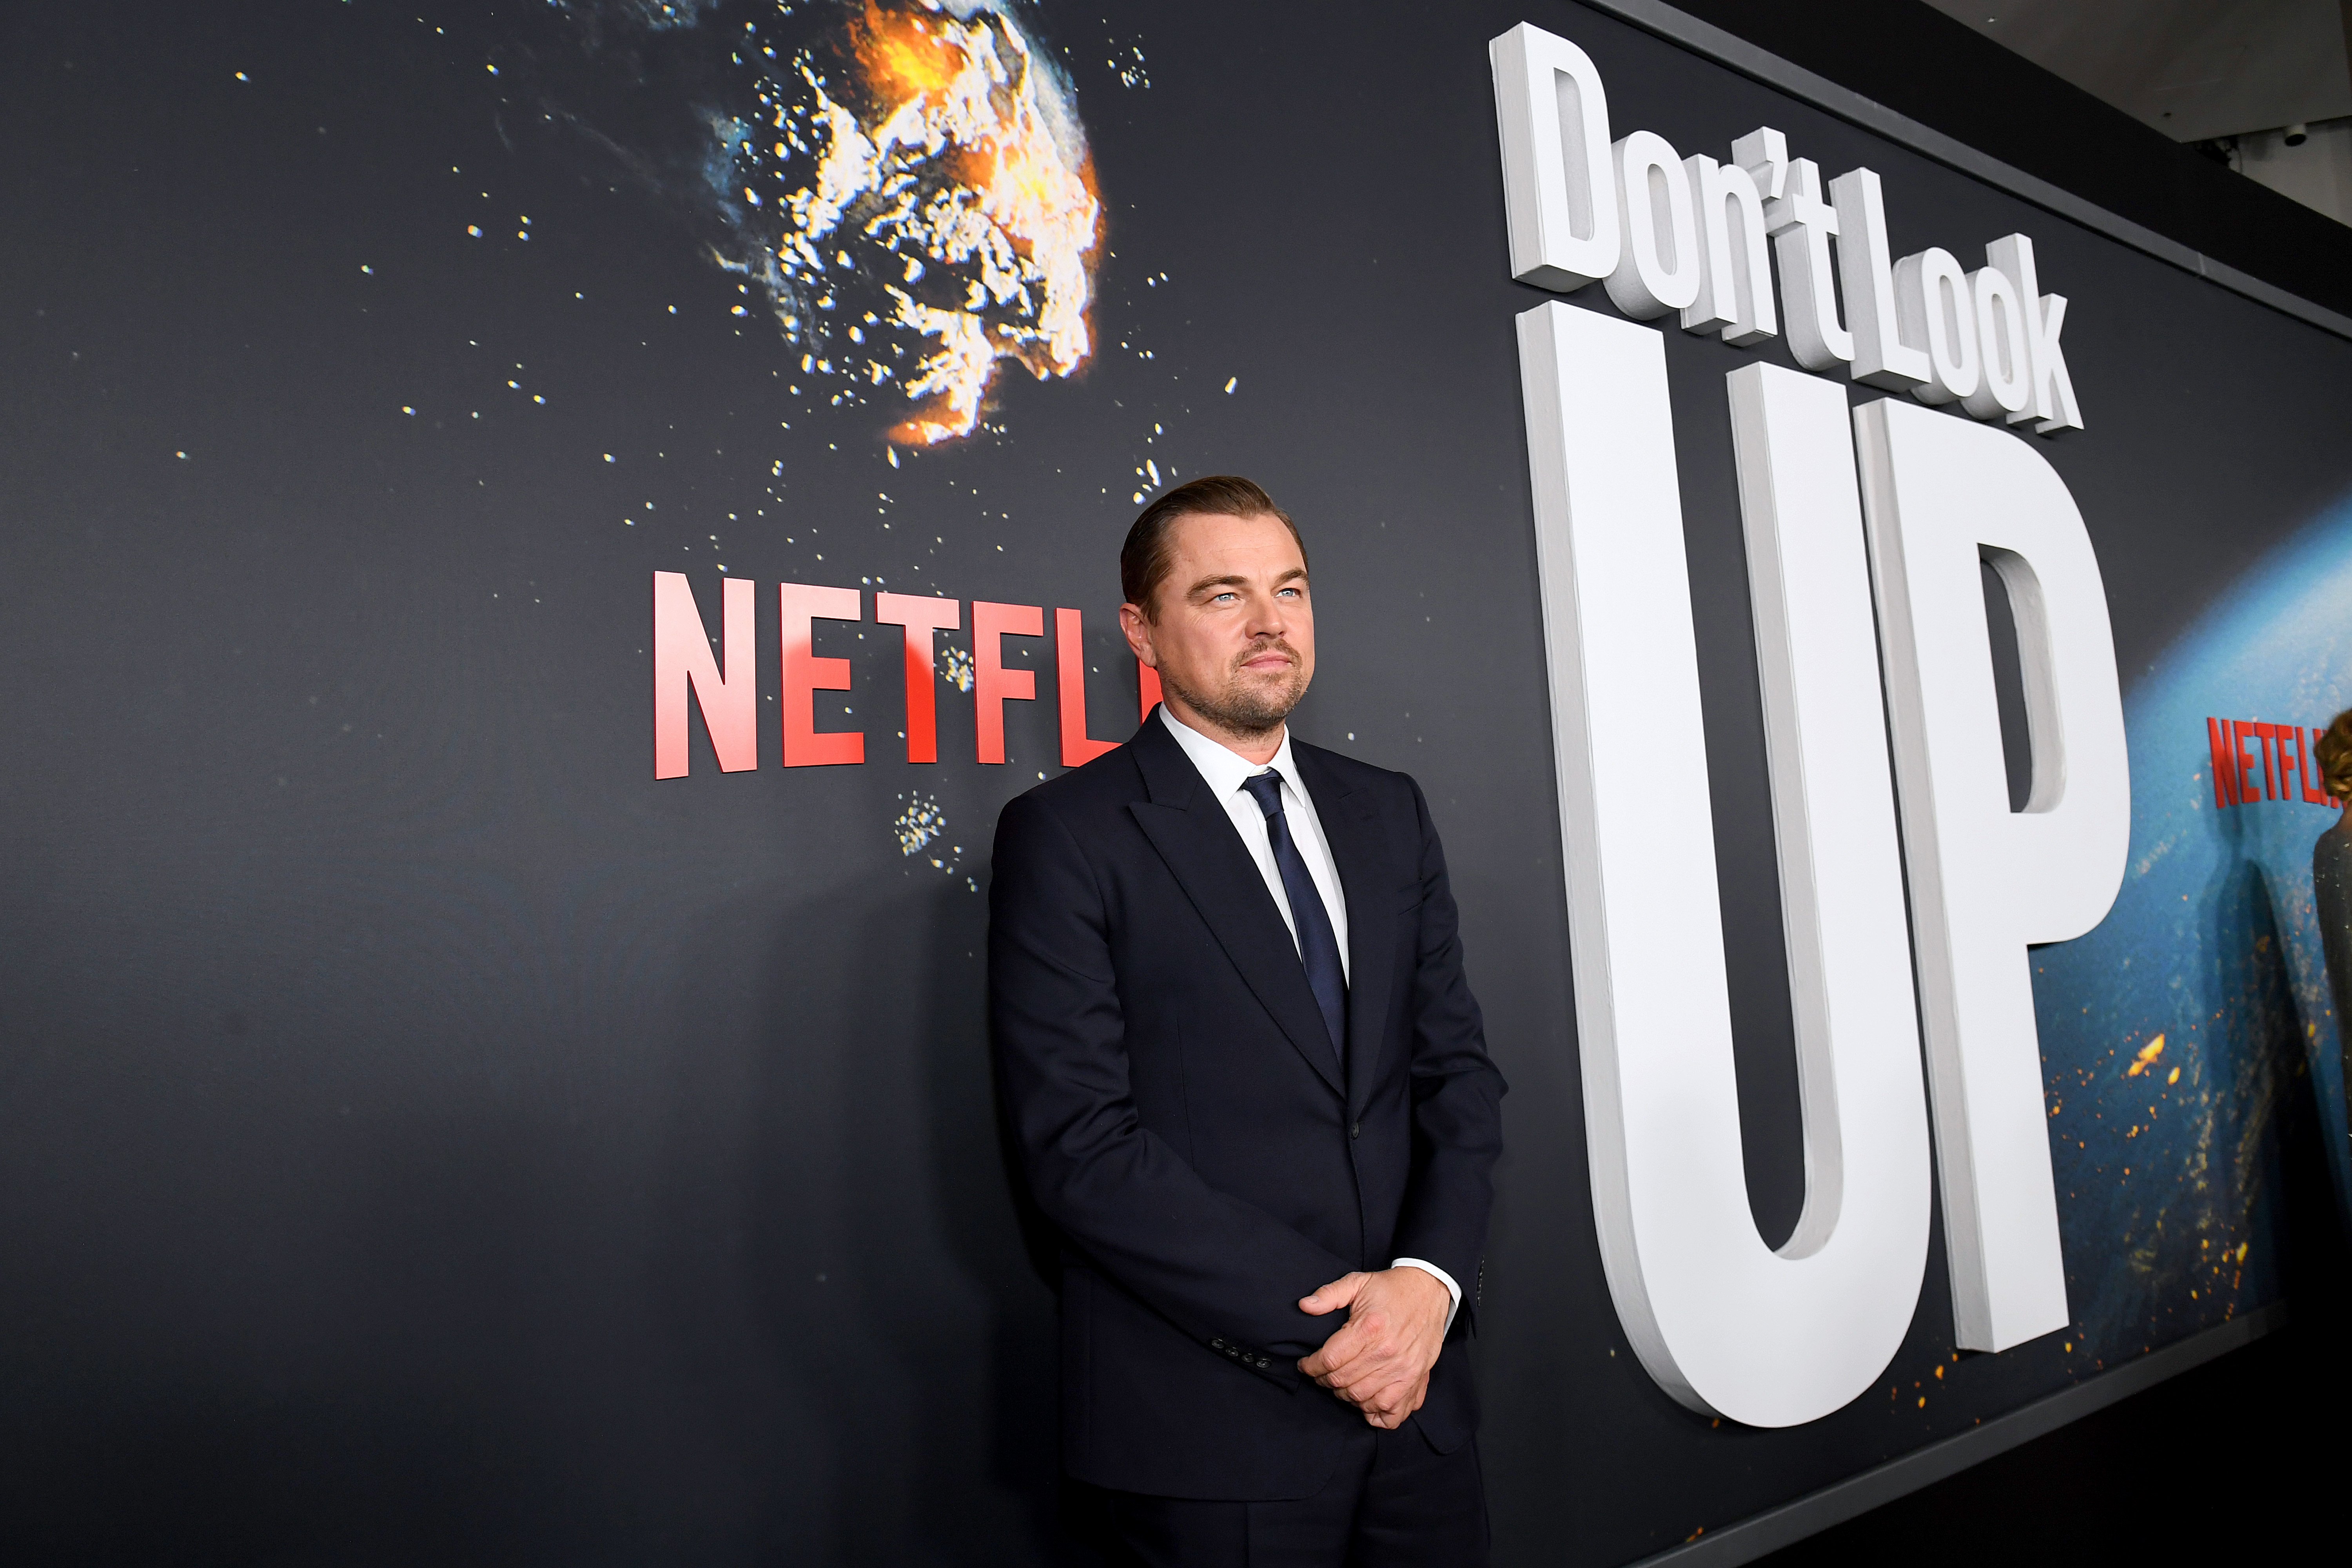 Leonardo DiCaprio posed at the "Don't Look Up" World Premiere in New York City | Source: Getty Images